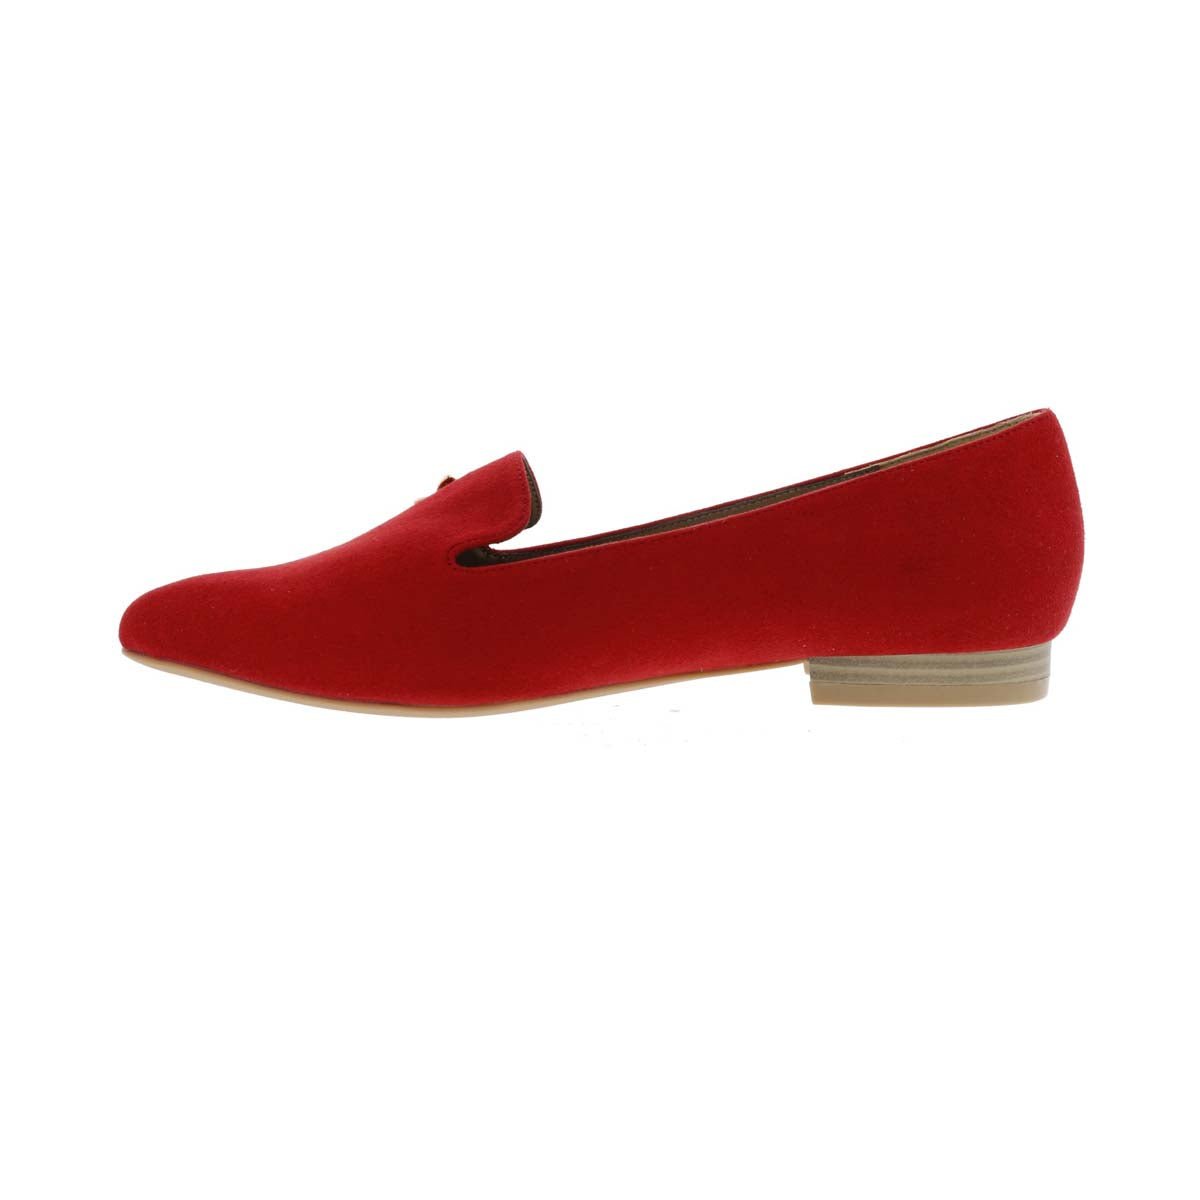 BELLINI DRAGONFLY WOMEN SLIP-ON IN RED MICROSUEDE - TLW Shoes